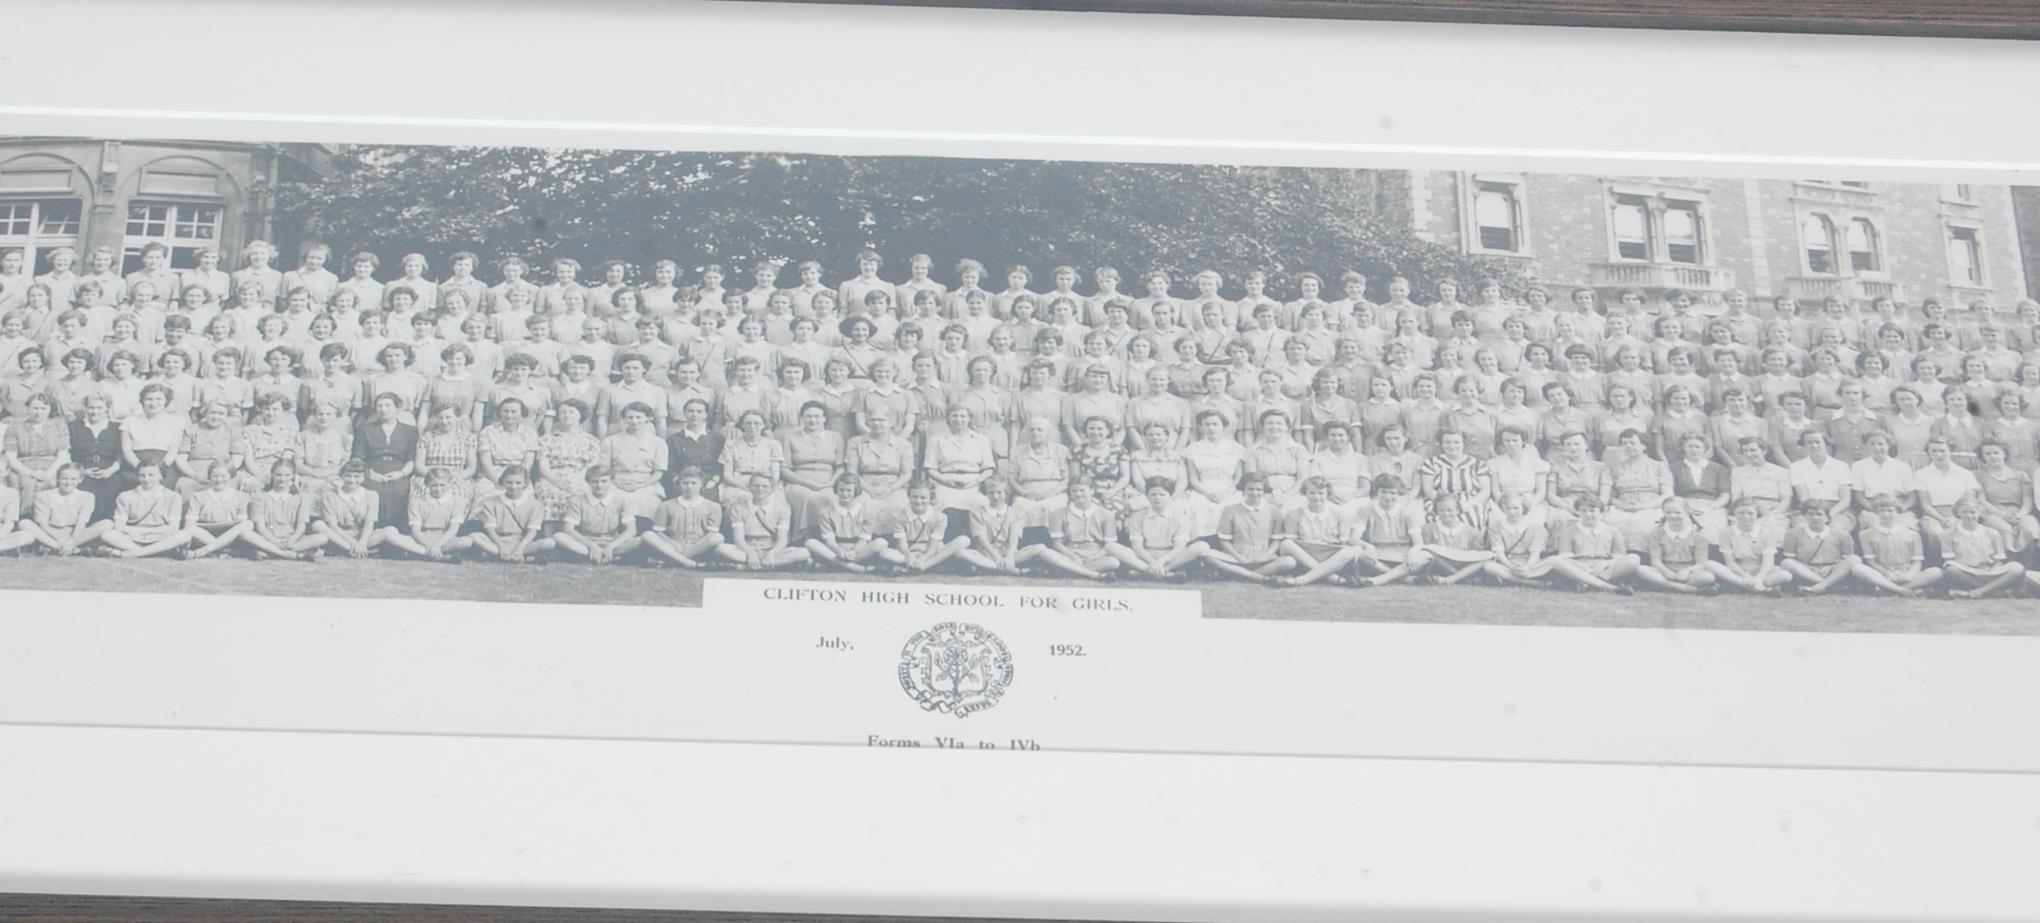 COOLECTION OF FOUR SCHOOL PHOTGRAPHS OF CLIFTON HIGH SCHOOL FOR GIRLS - Image 17 of 18